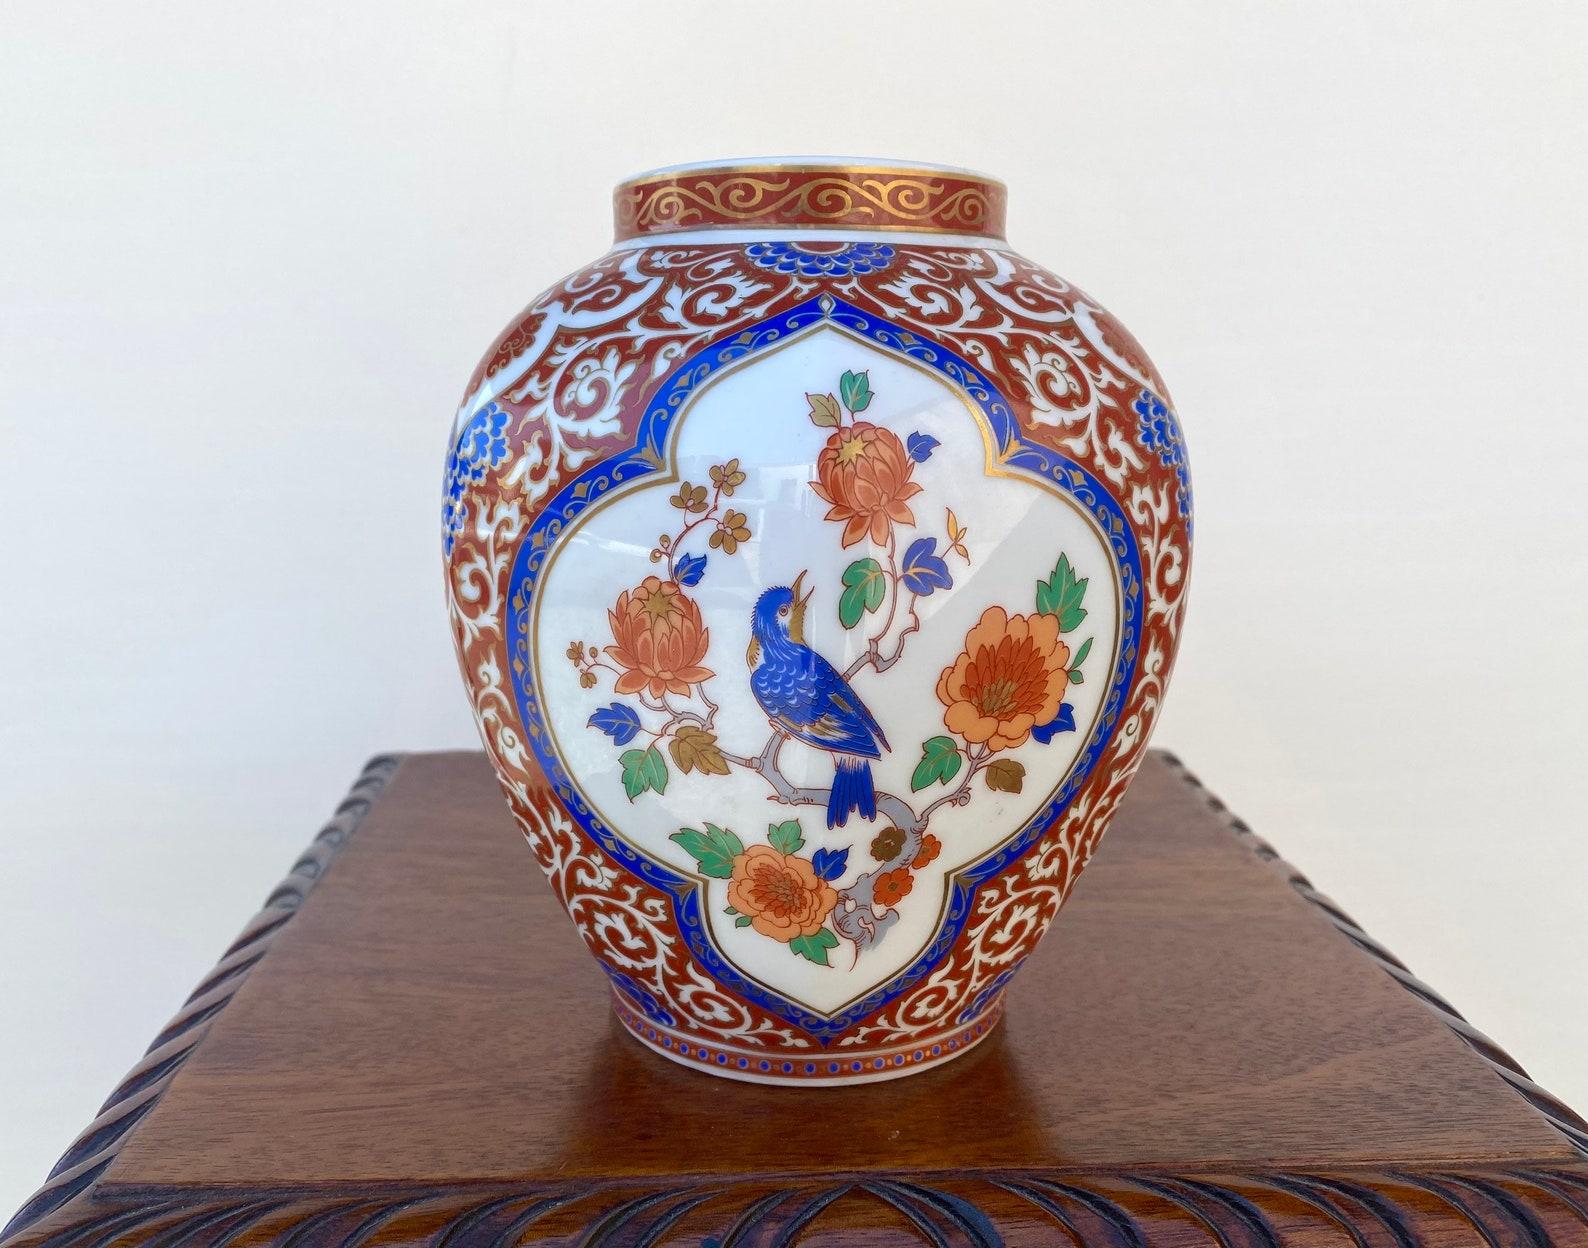 Vintage Kaiser Vase “Ming” collection.

Famous West Germany Manufacture Kaiser.

Time-Tasted High Quality Porcelain.

Beautiful Collection “Ming” famous for its beautiful decor in the form of flowers and birds.  

The orange color, gilding and